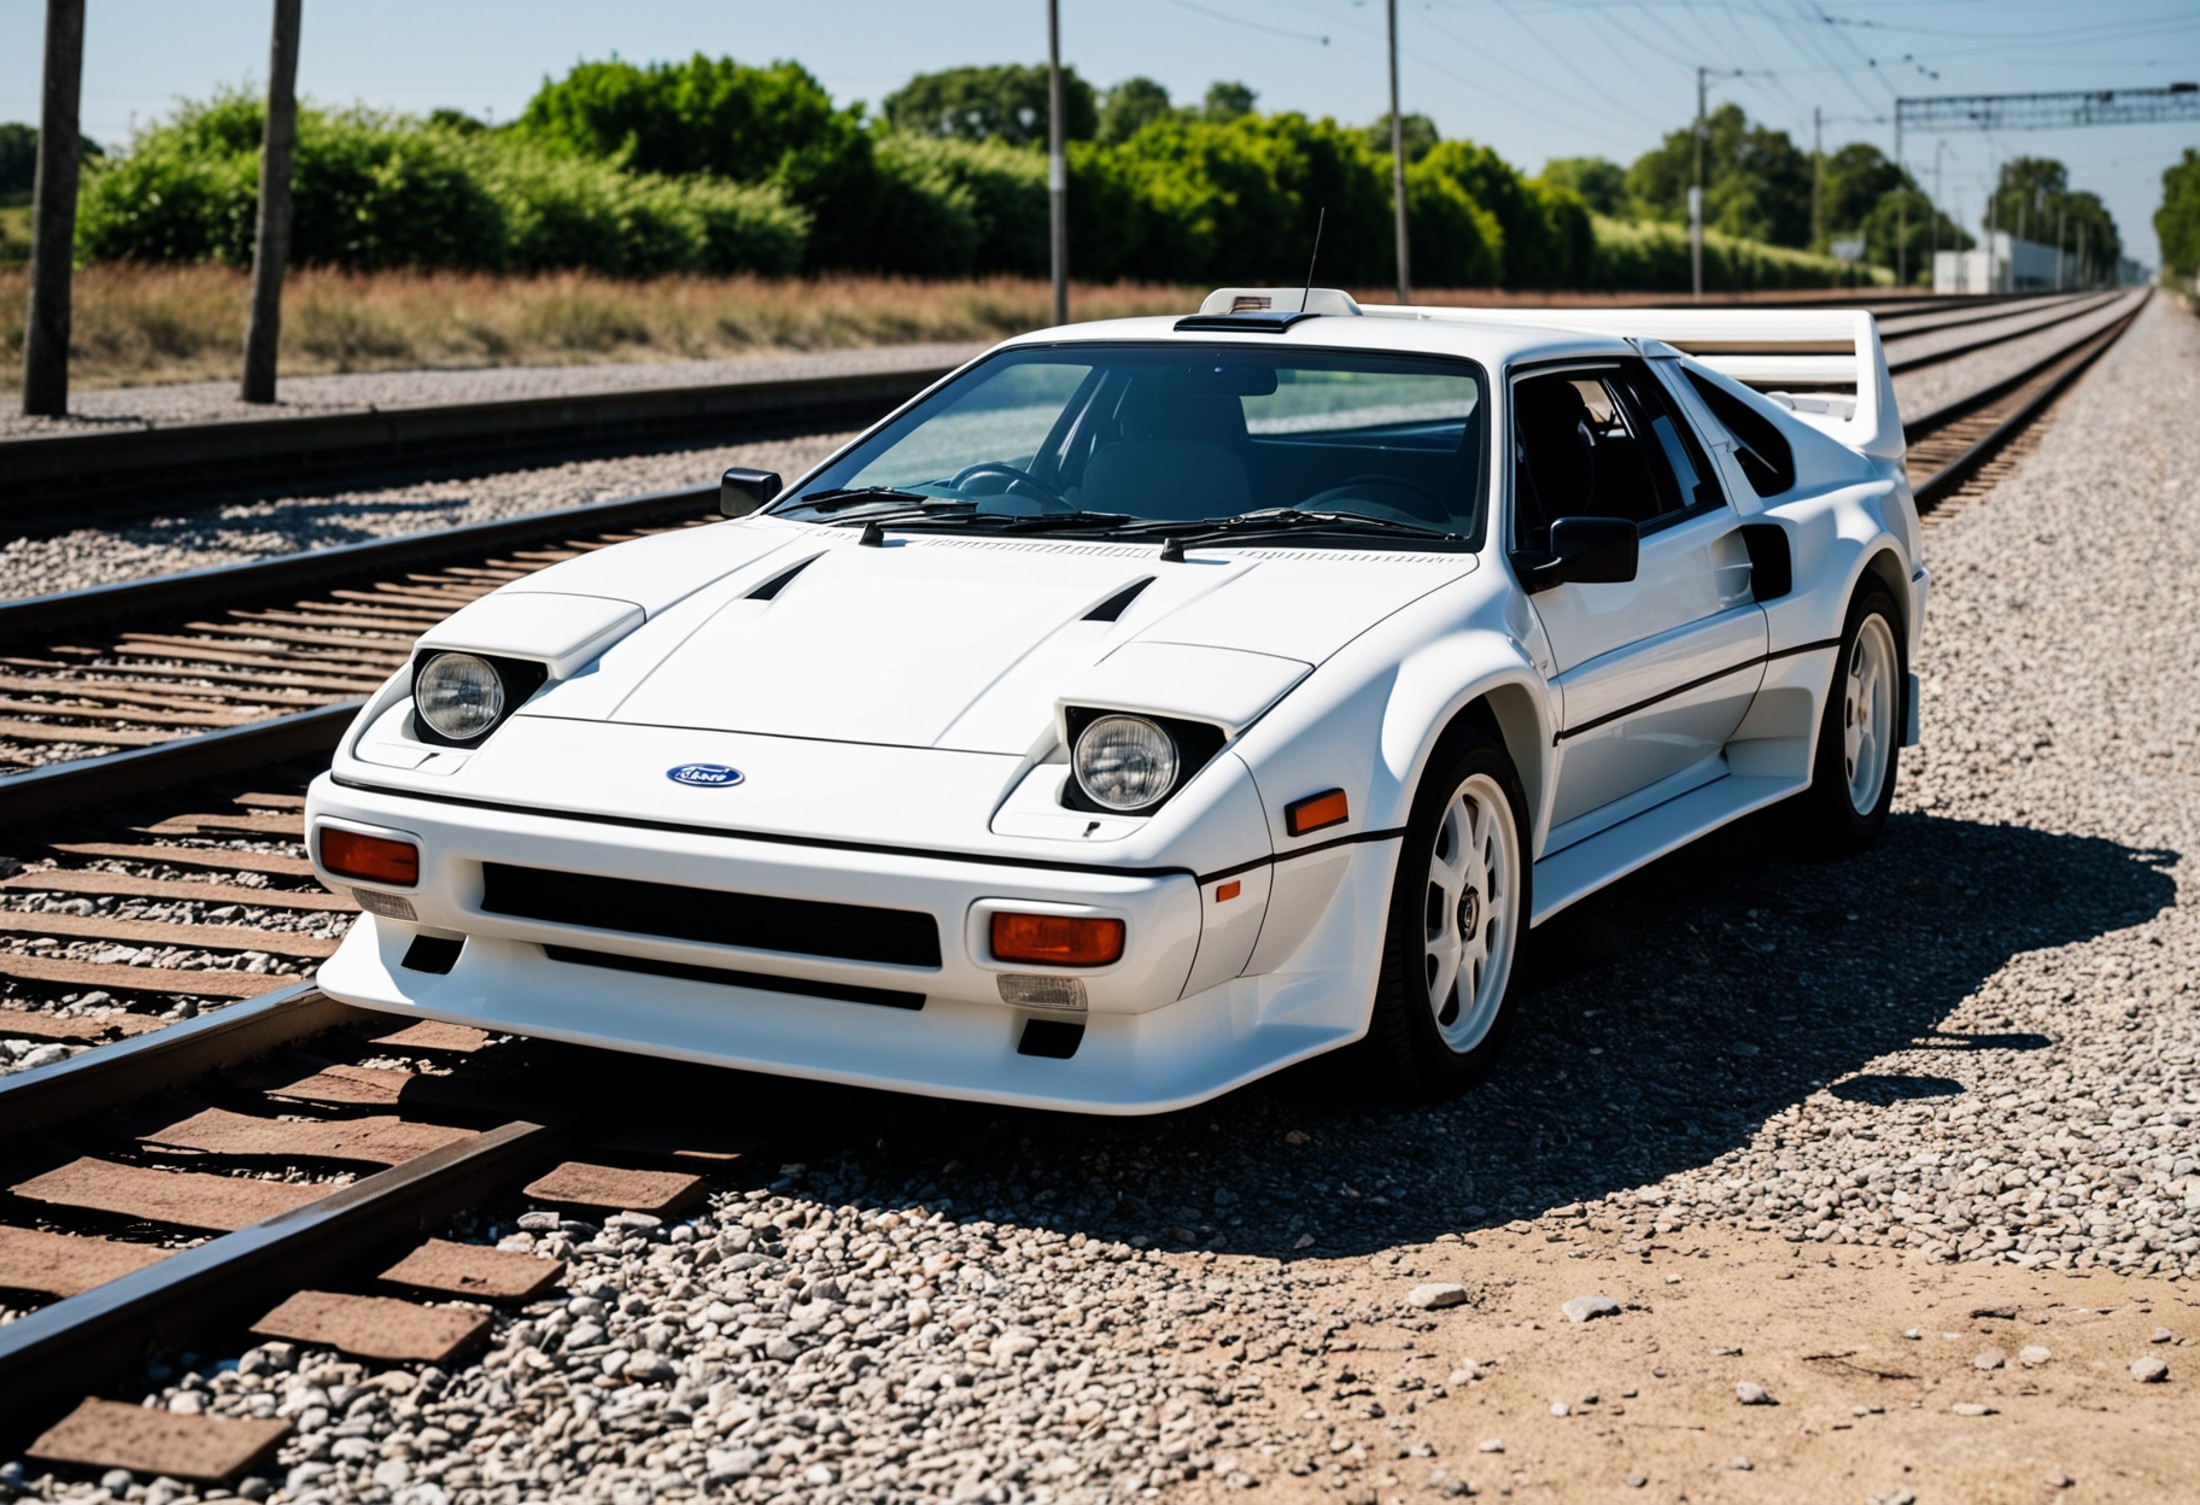 A white 1986 Ford RS200 sports car is parked on the railroad tracks, its sleek design and pop-up headlight standing out ag...